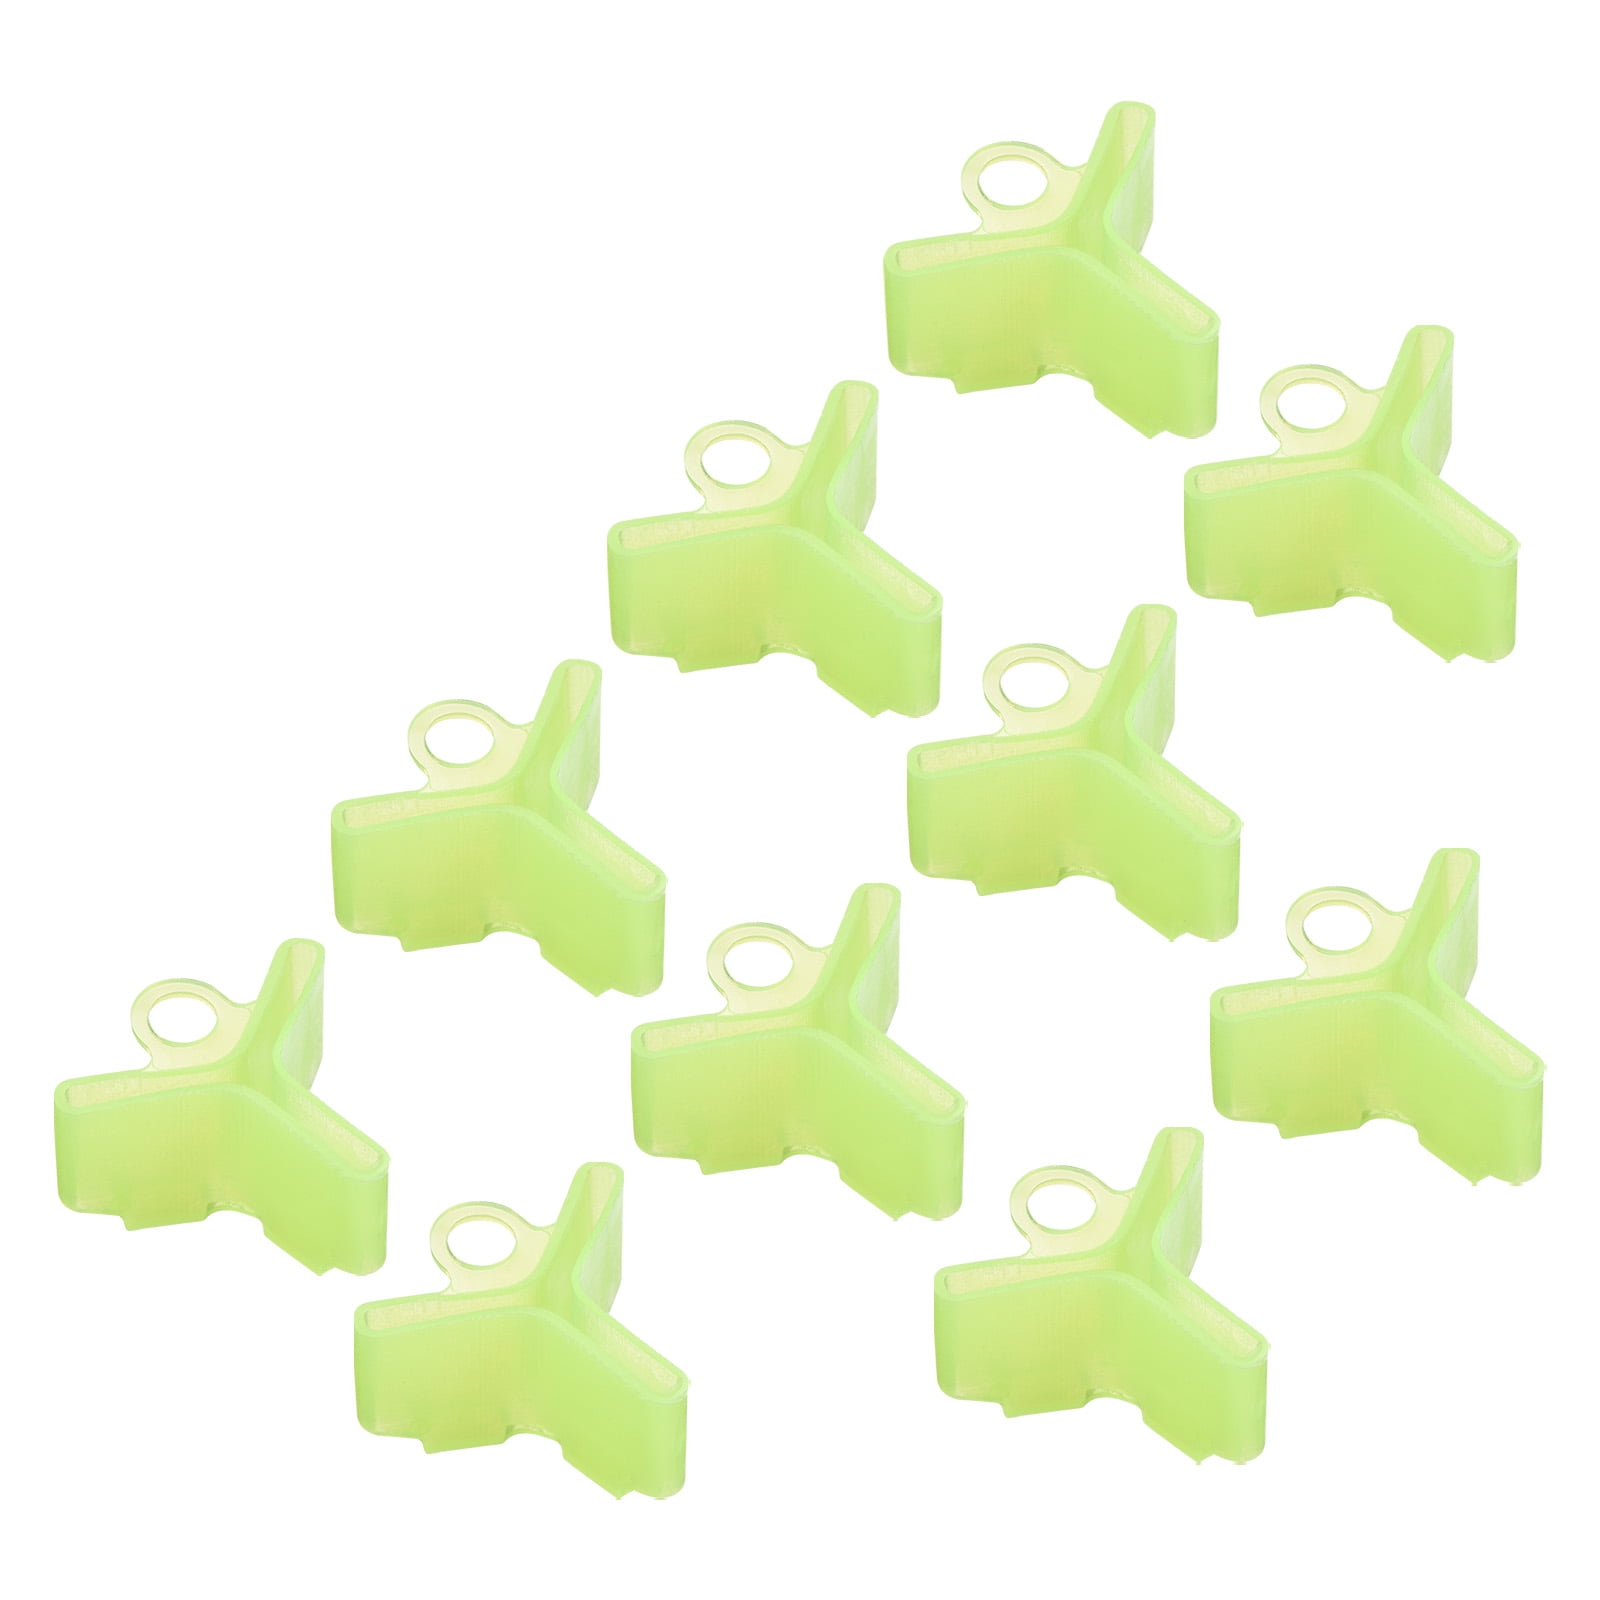 40PCS Fishing Hook Safety Covers, Hook Bonnets, Treble Hook Guards - Spring  Design, One Size Fits Most, Hollow Construction * Free, Protective